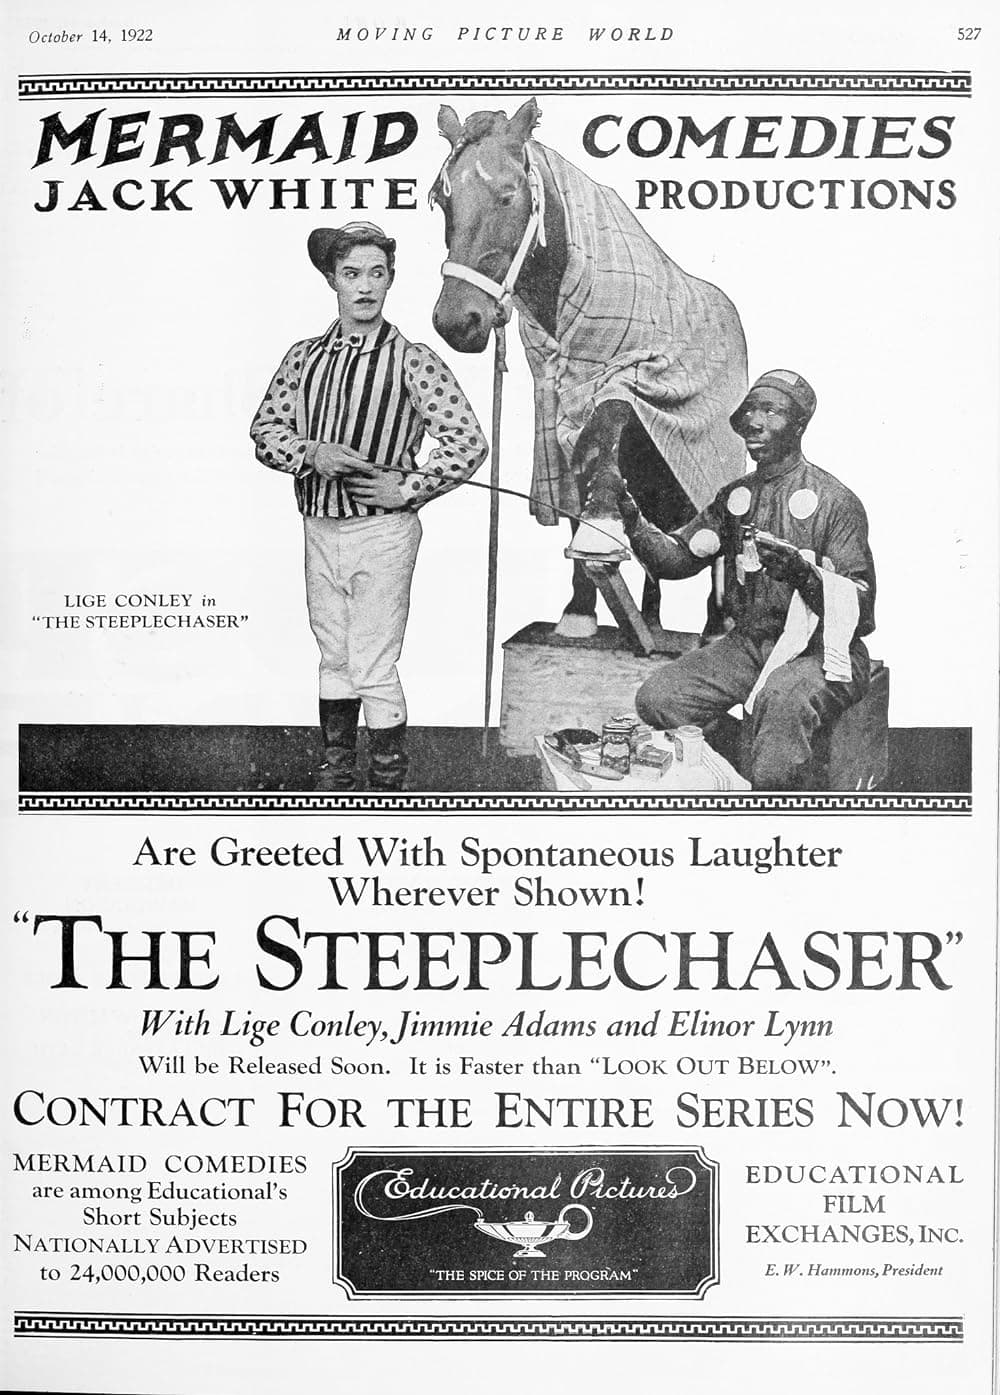 The Steeplechase